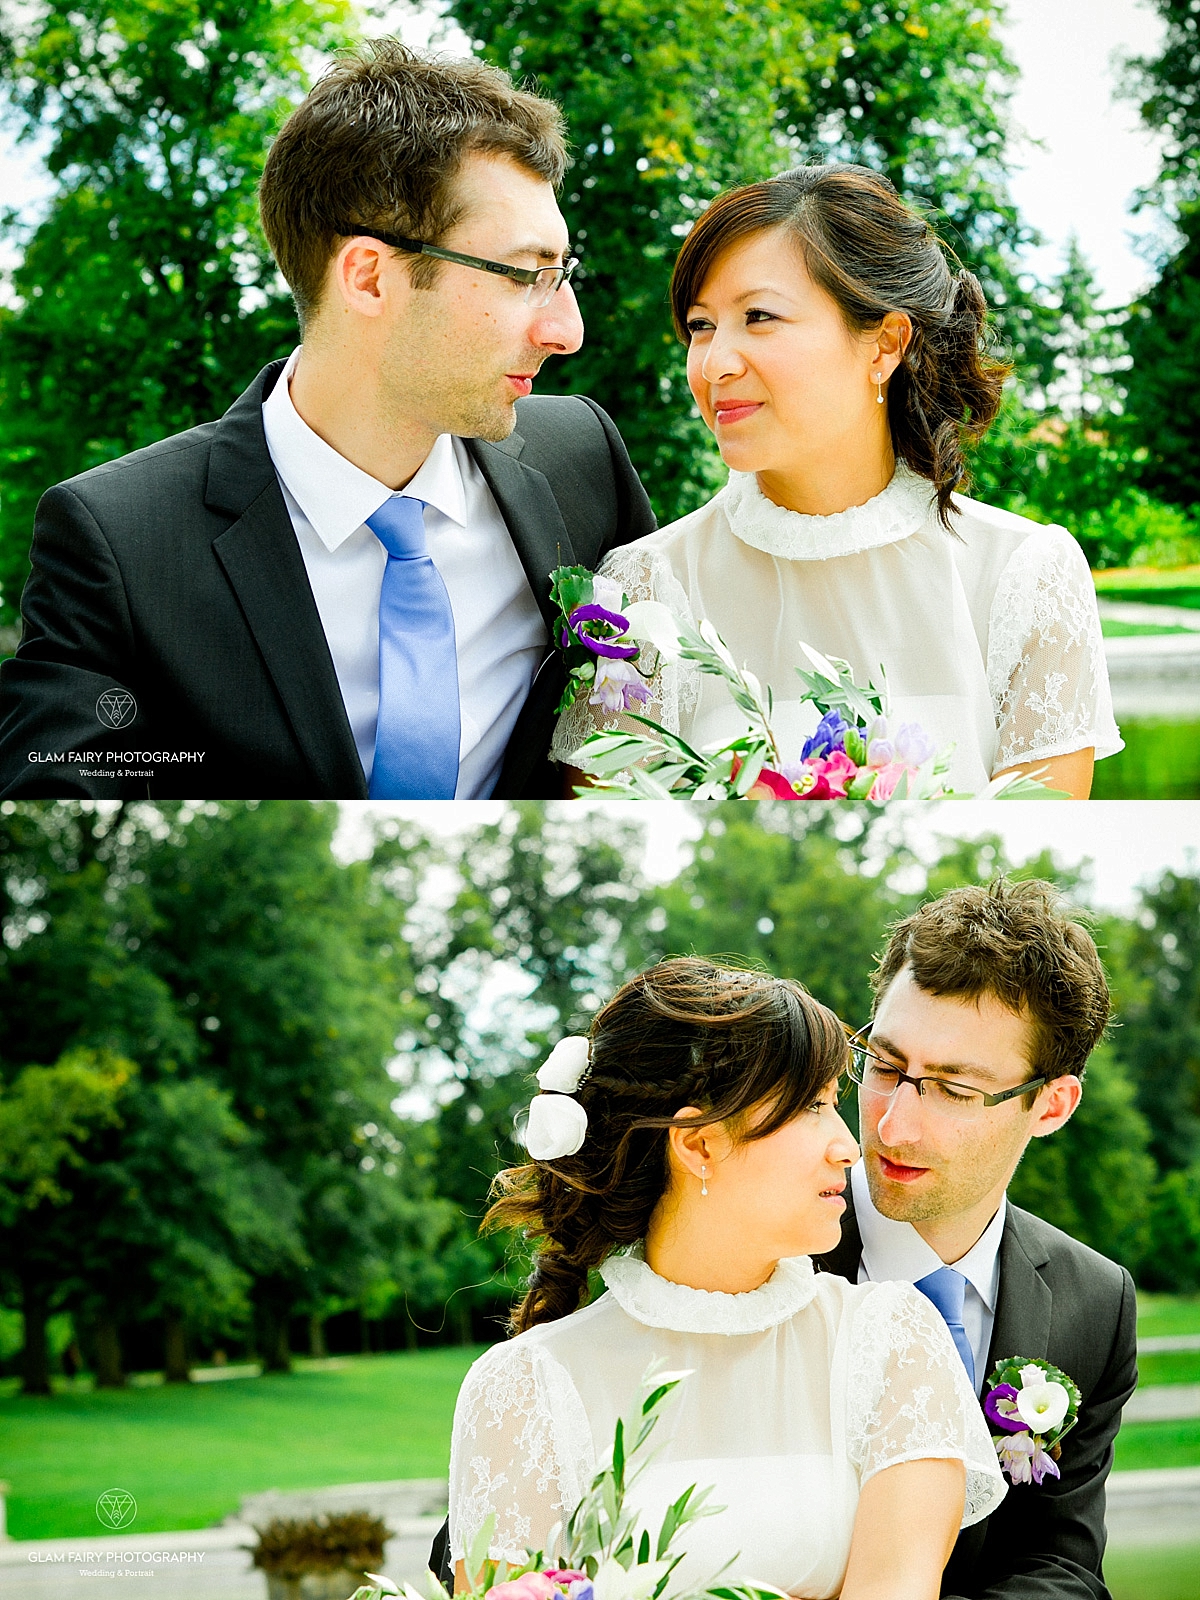 GlamFairyPhotography-GlamFairyPhotography-mariage-franco-chinois-ymeuil_0029